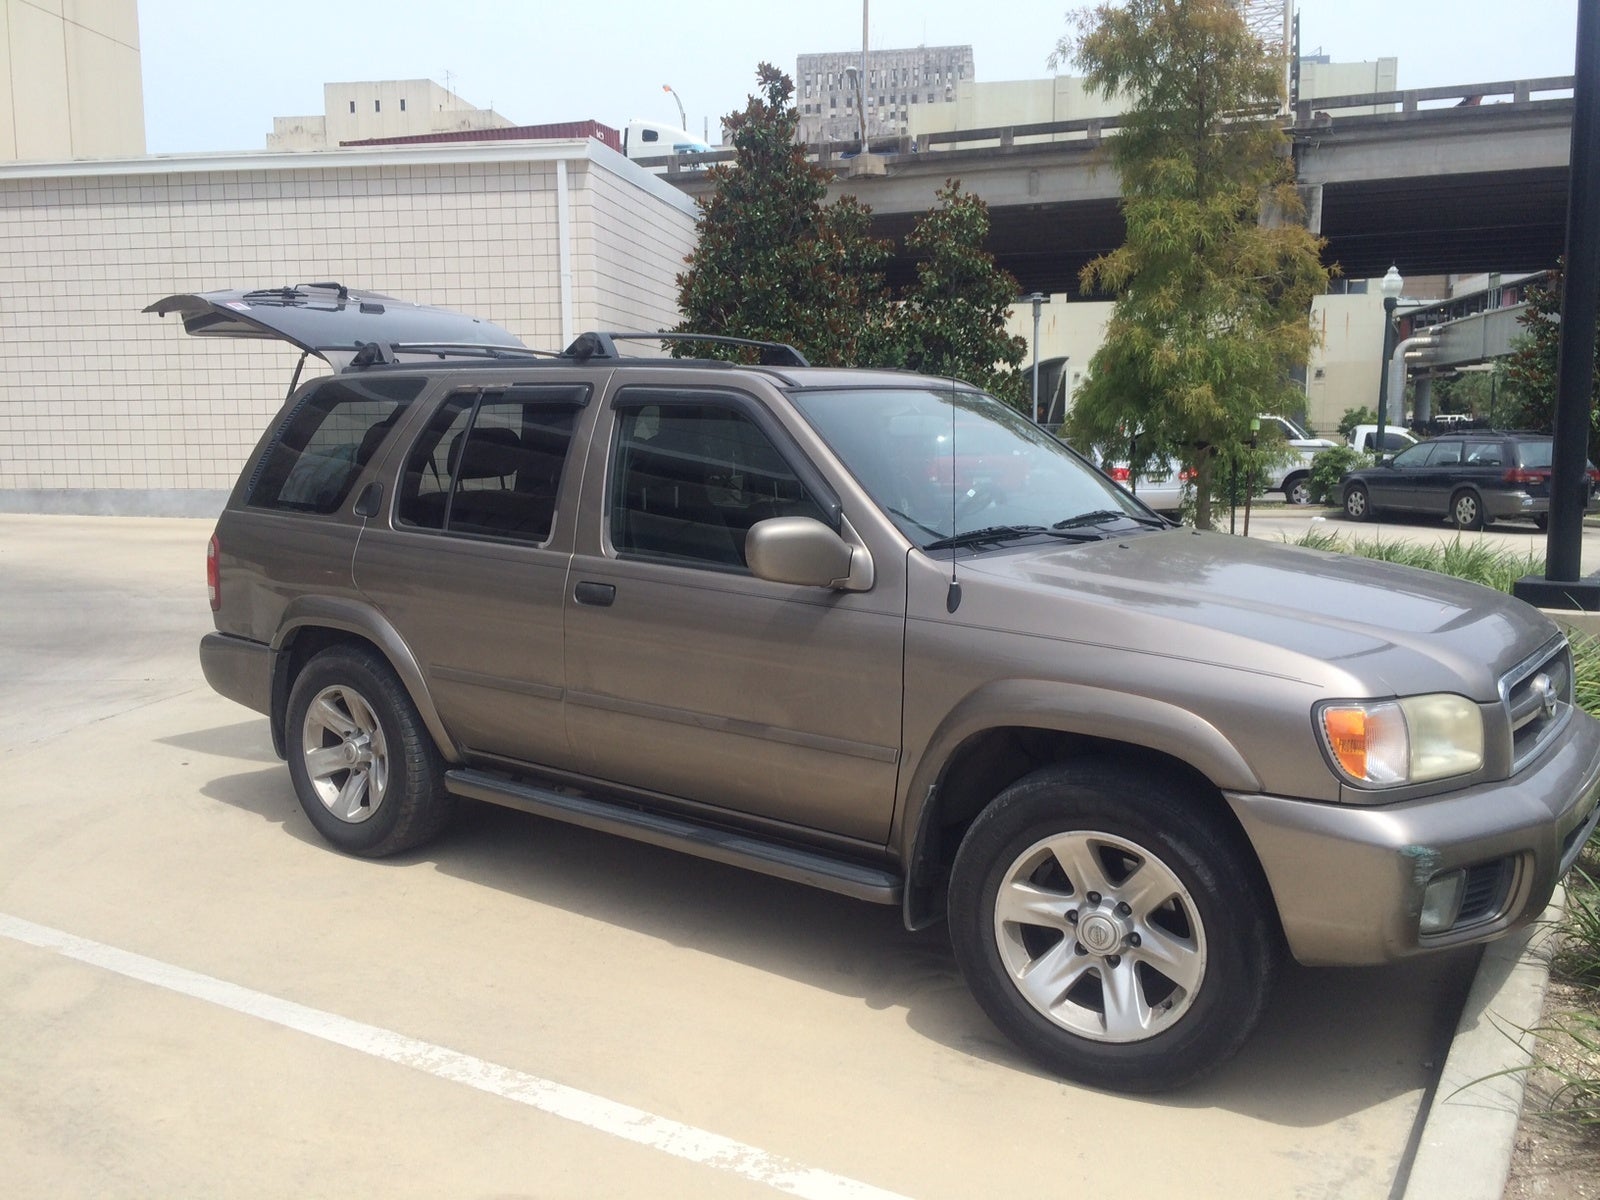 2002 Nissan pathfinder le specifications #9